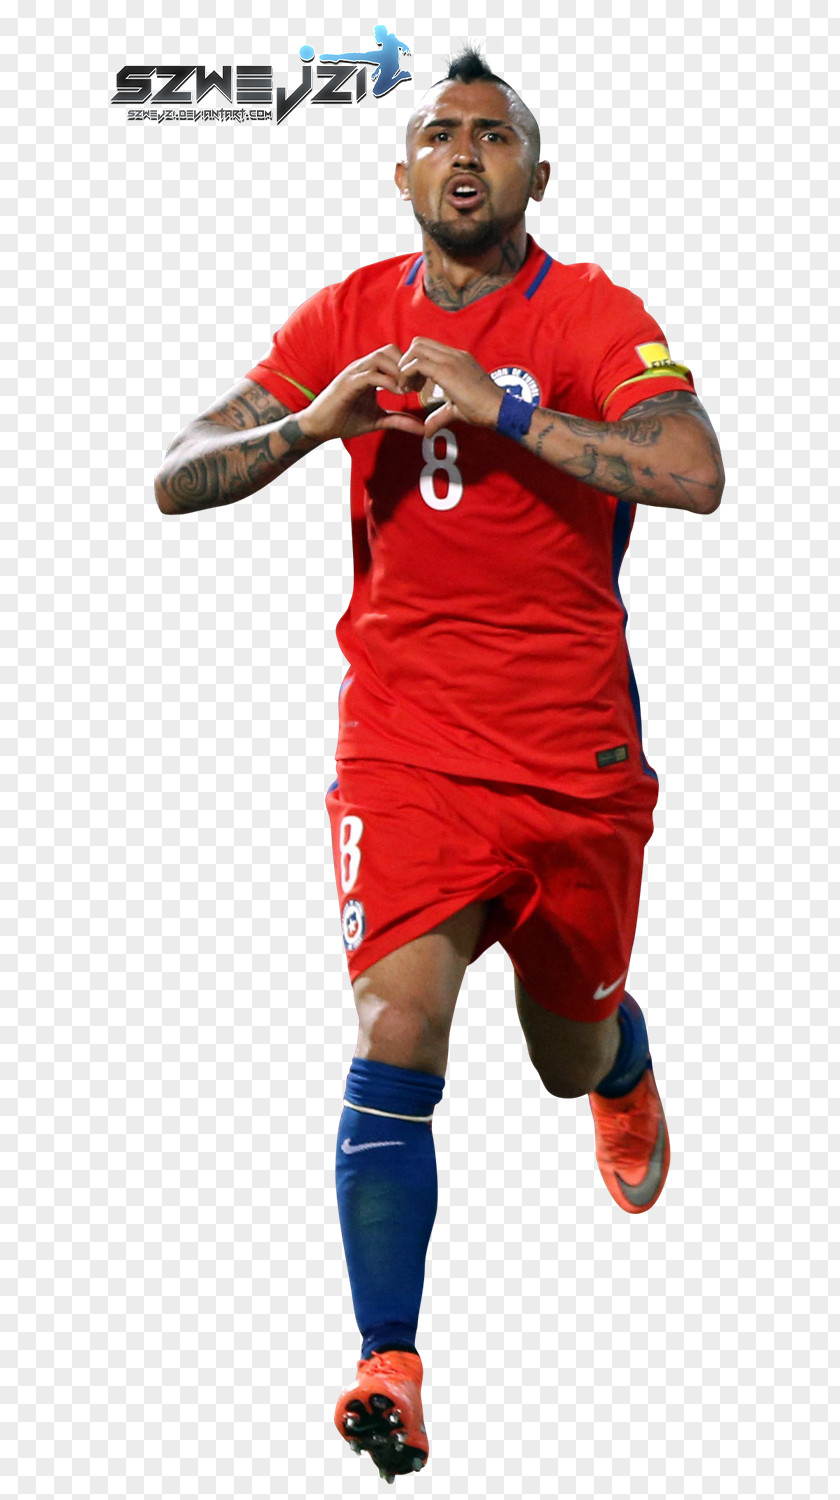 Football Arturo Vidal Juventus F.C. 2017 Conference On Computer Vision And Pattern Recognition Player Chile PNG